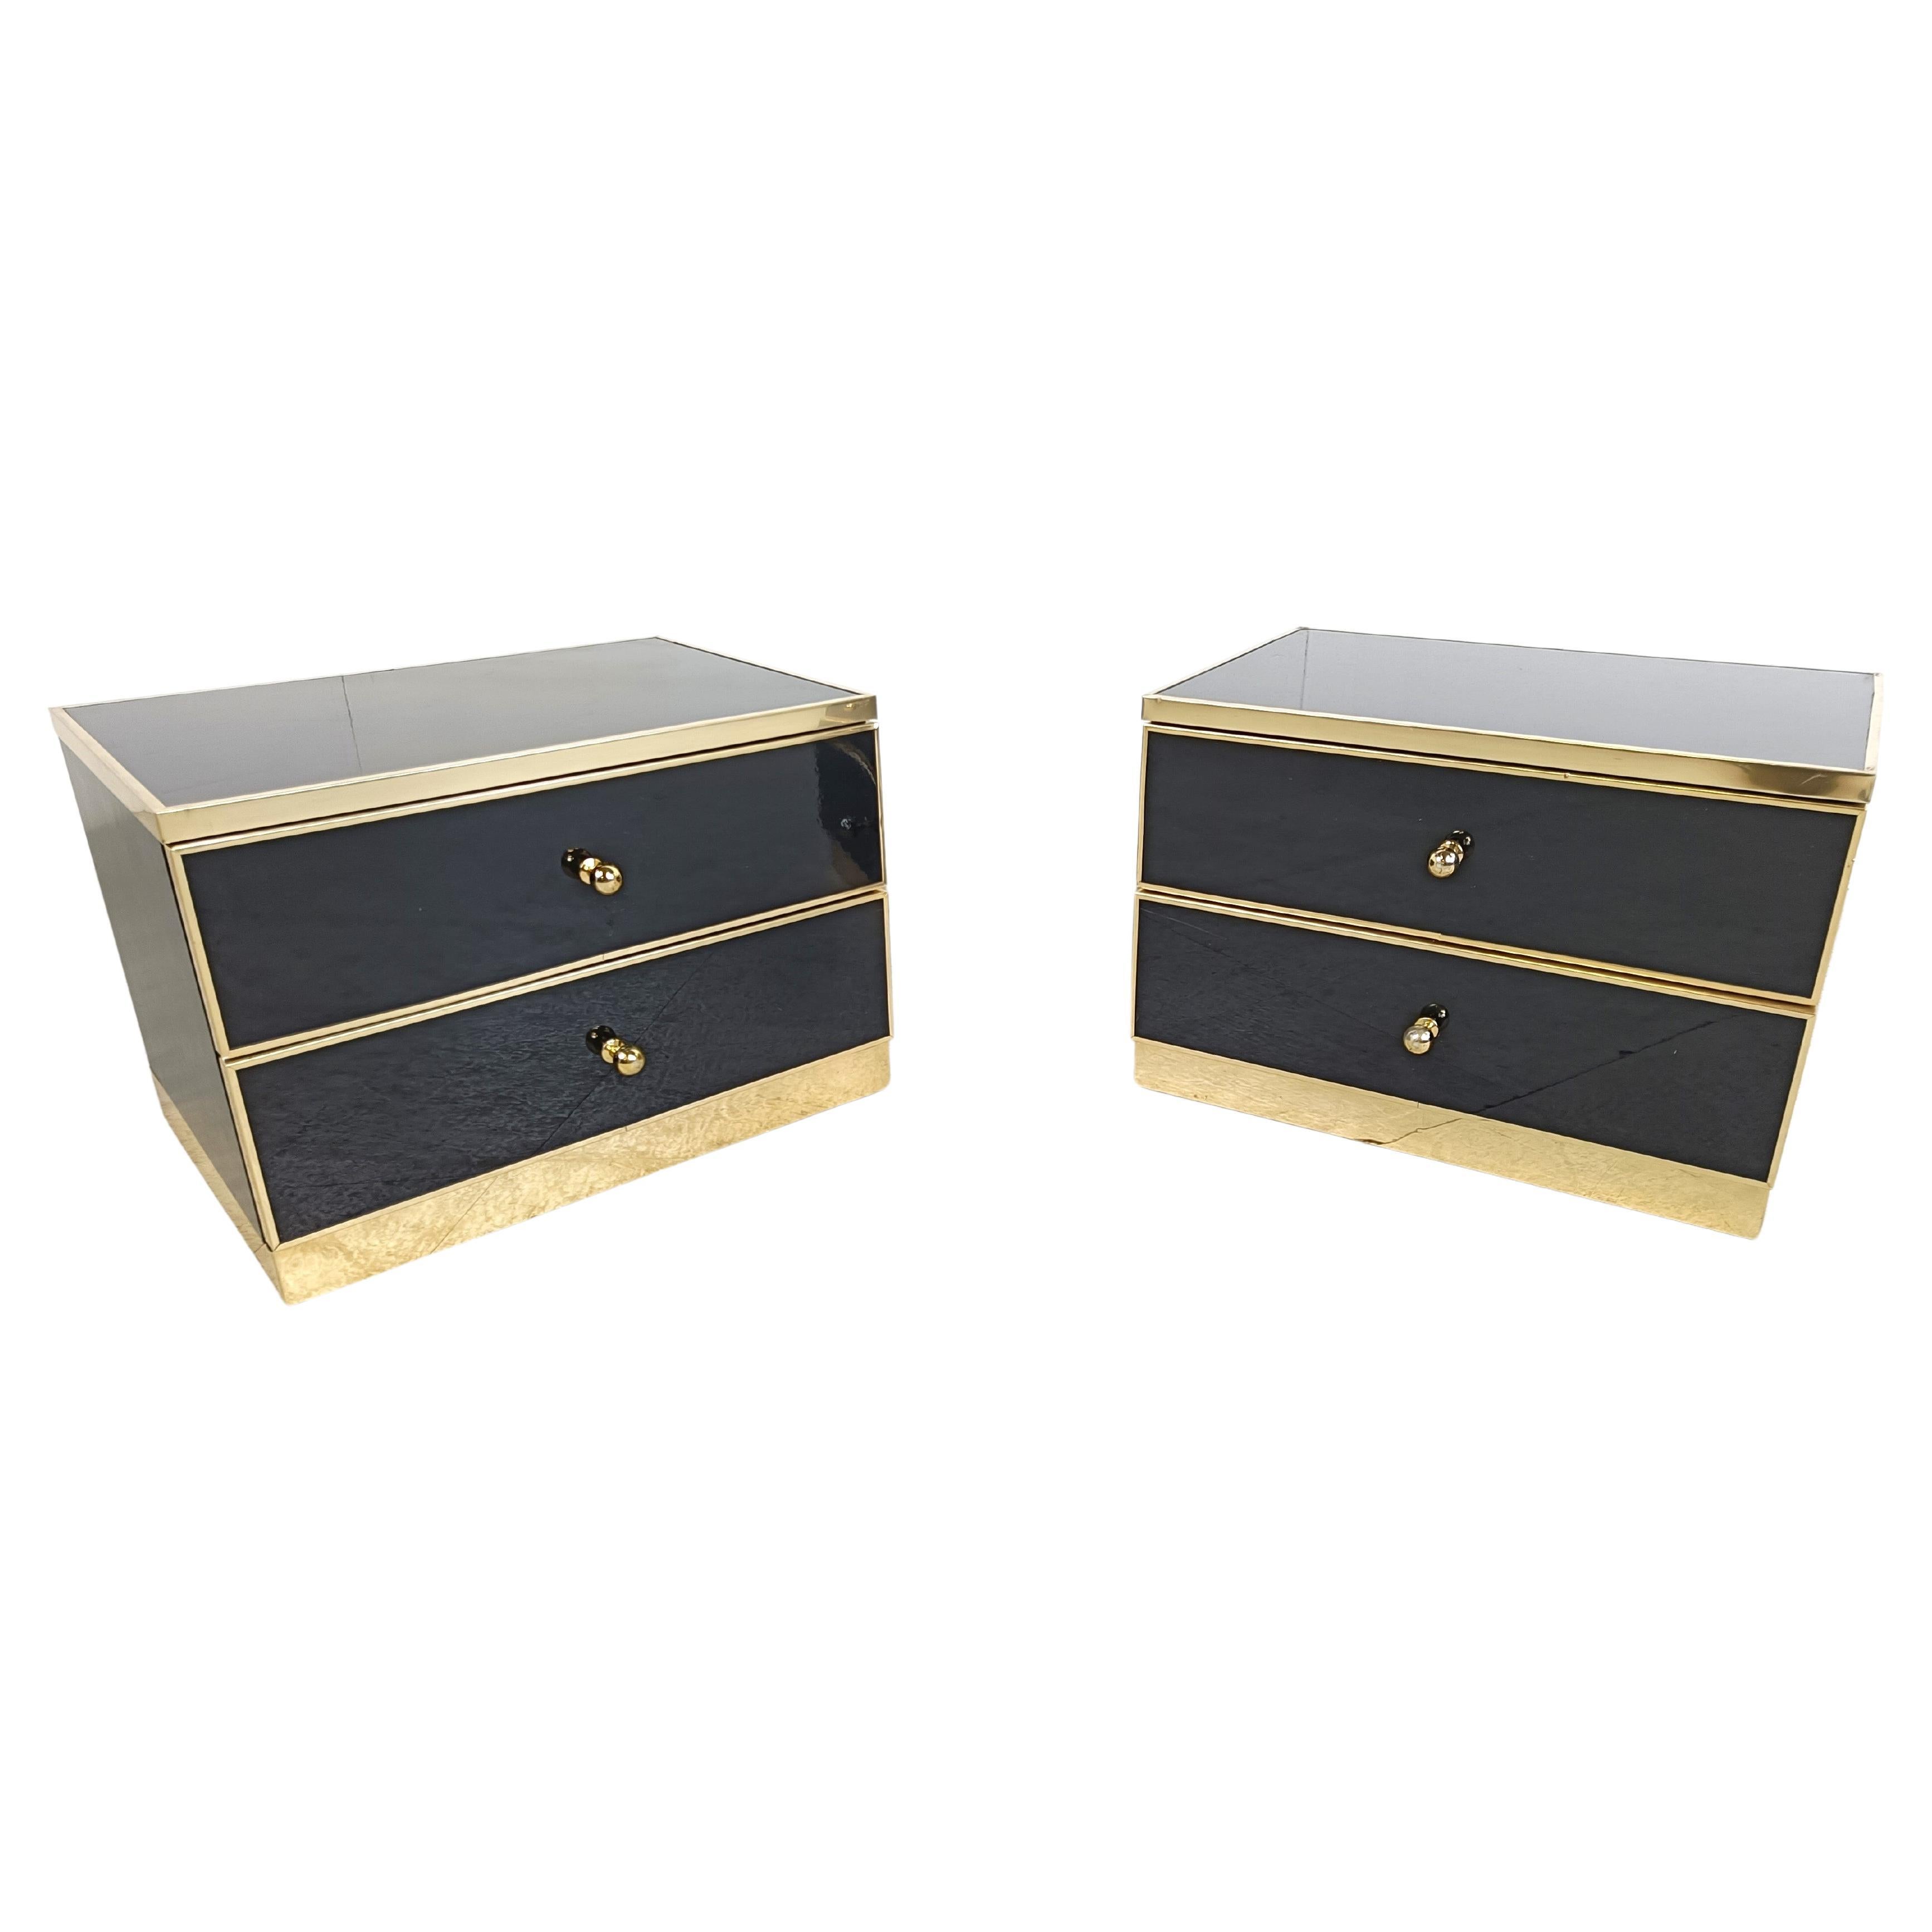 Pair of bedside cabinets, 1970s